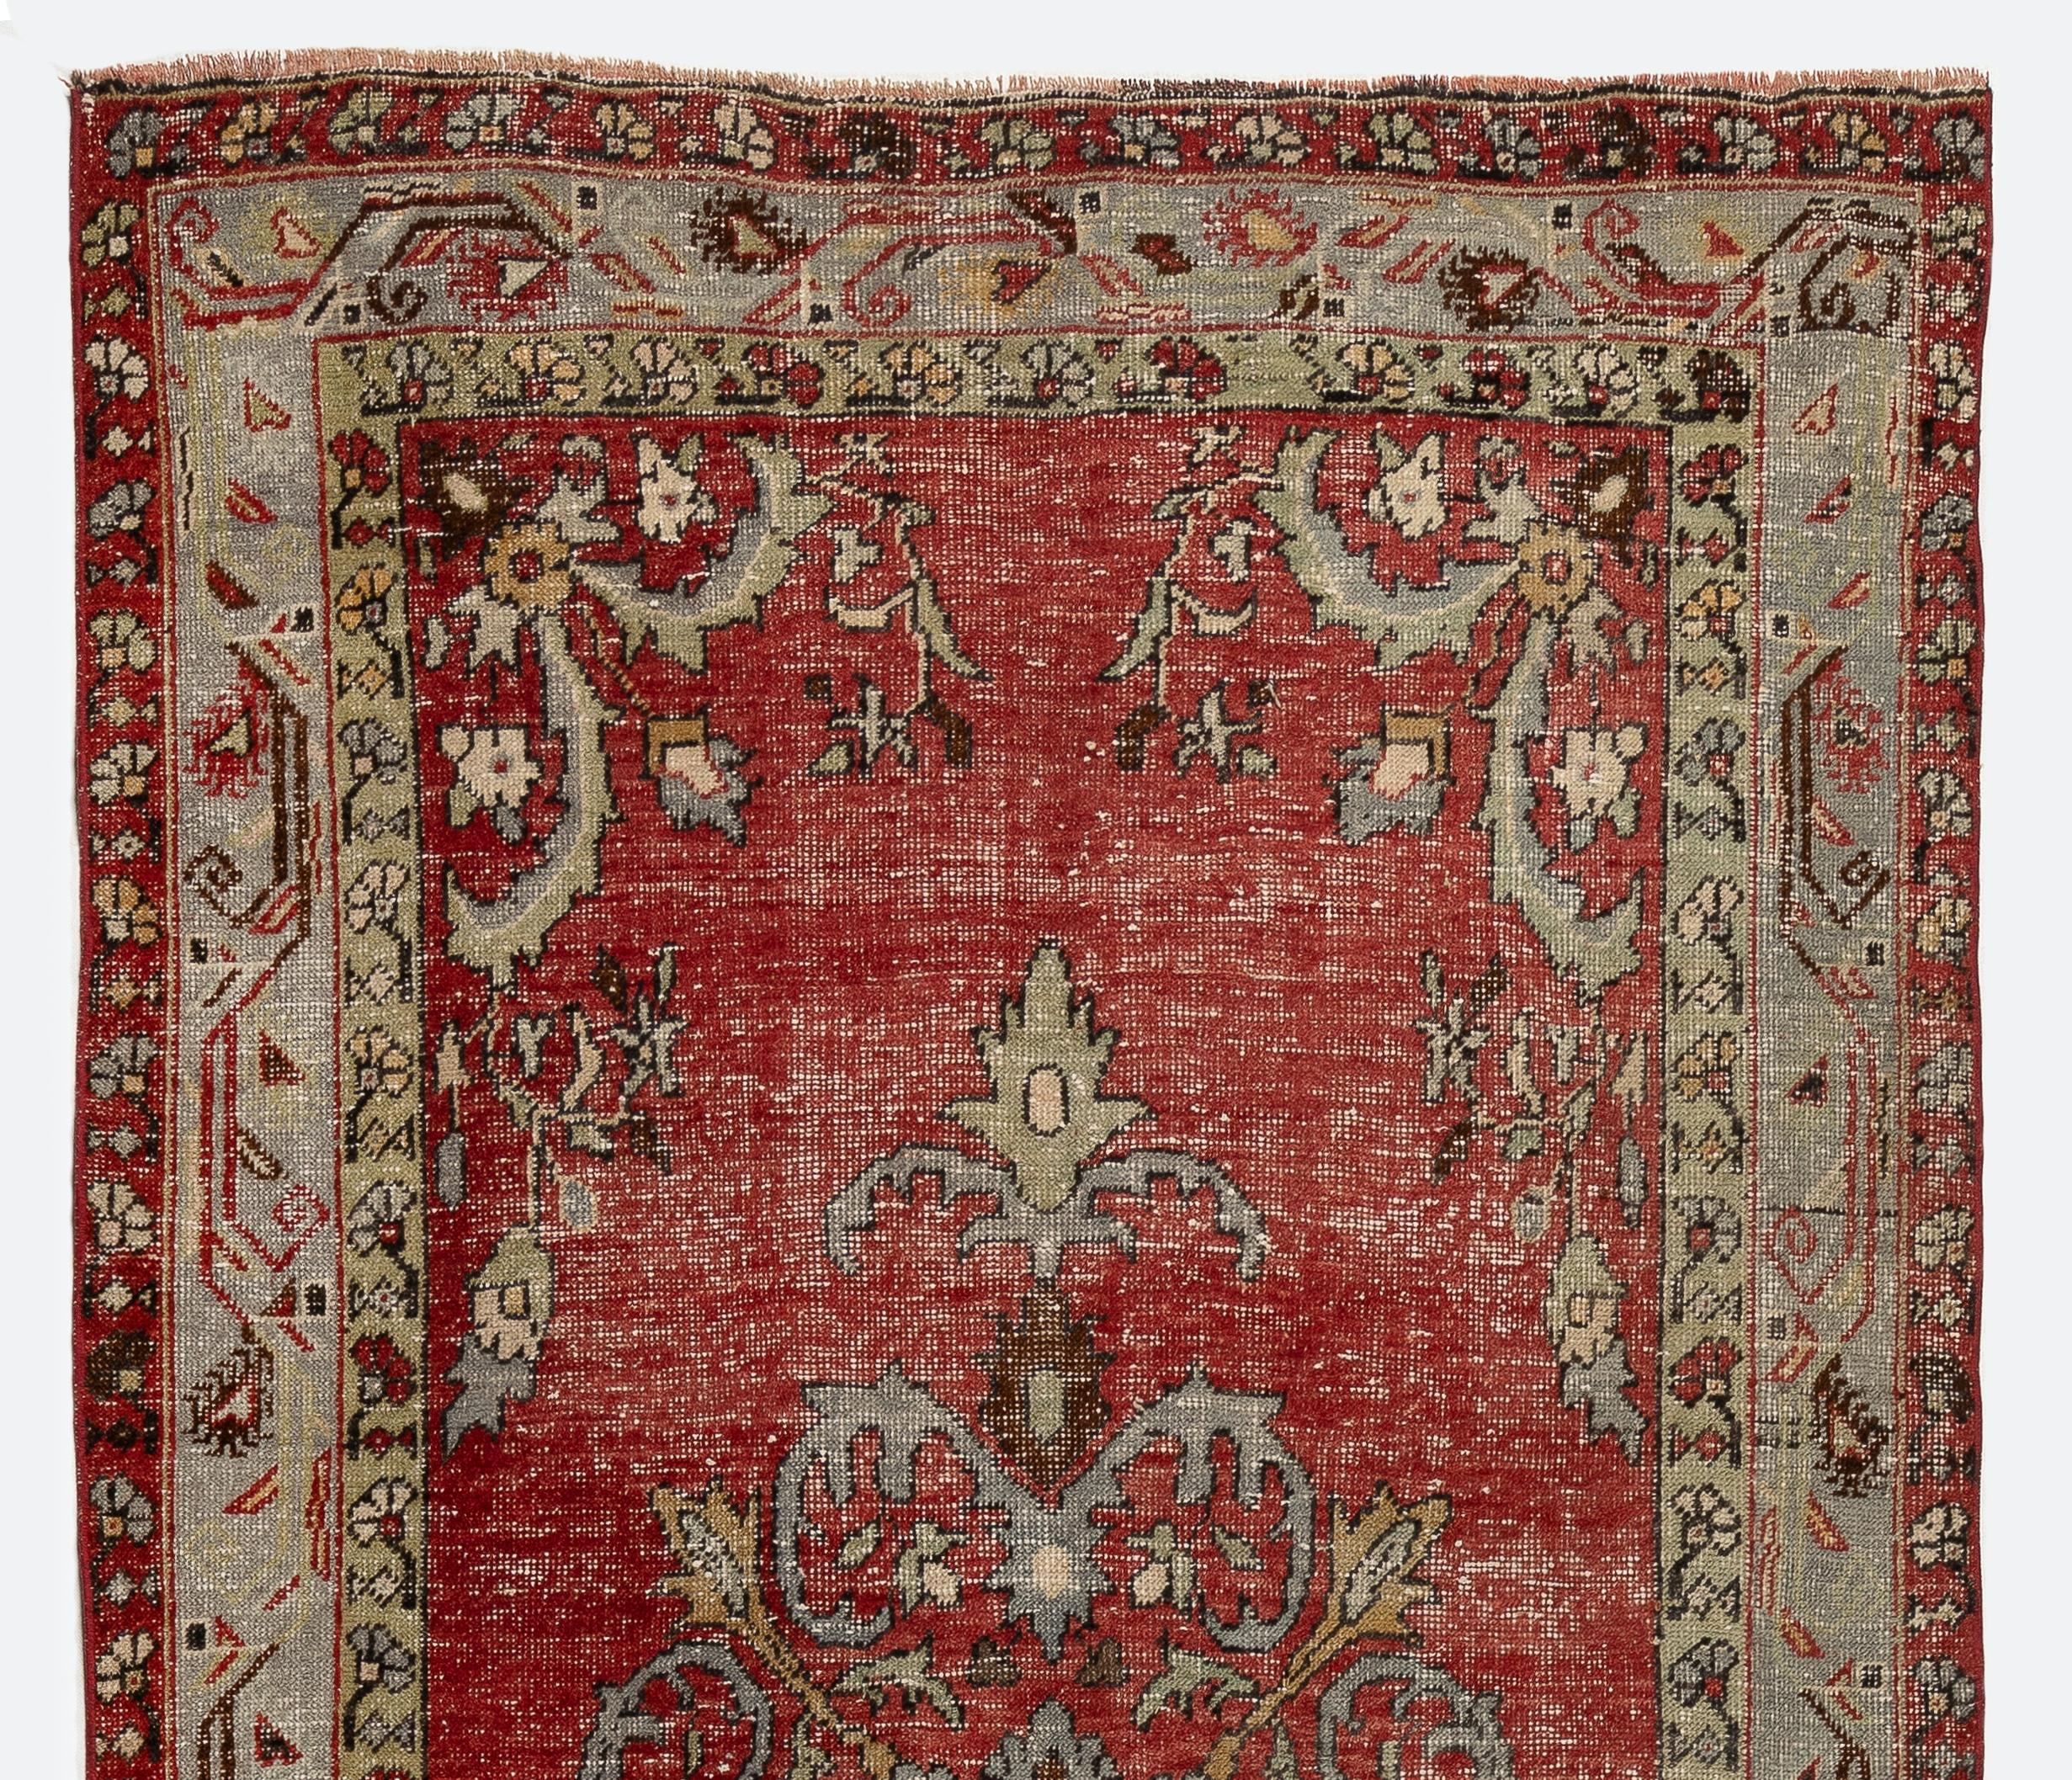 A vintage hand-knotted runner rug from Turkey with distressed low wool pile on cotton foundation that features two linked medallions with arabesque outlines in light blue against a red field and a main border in light blue. 

The rug is in good